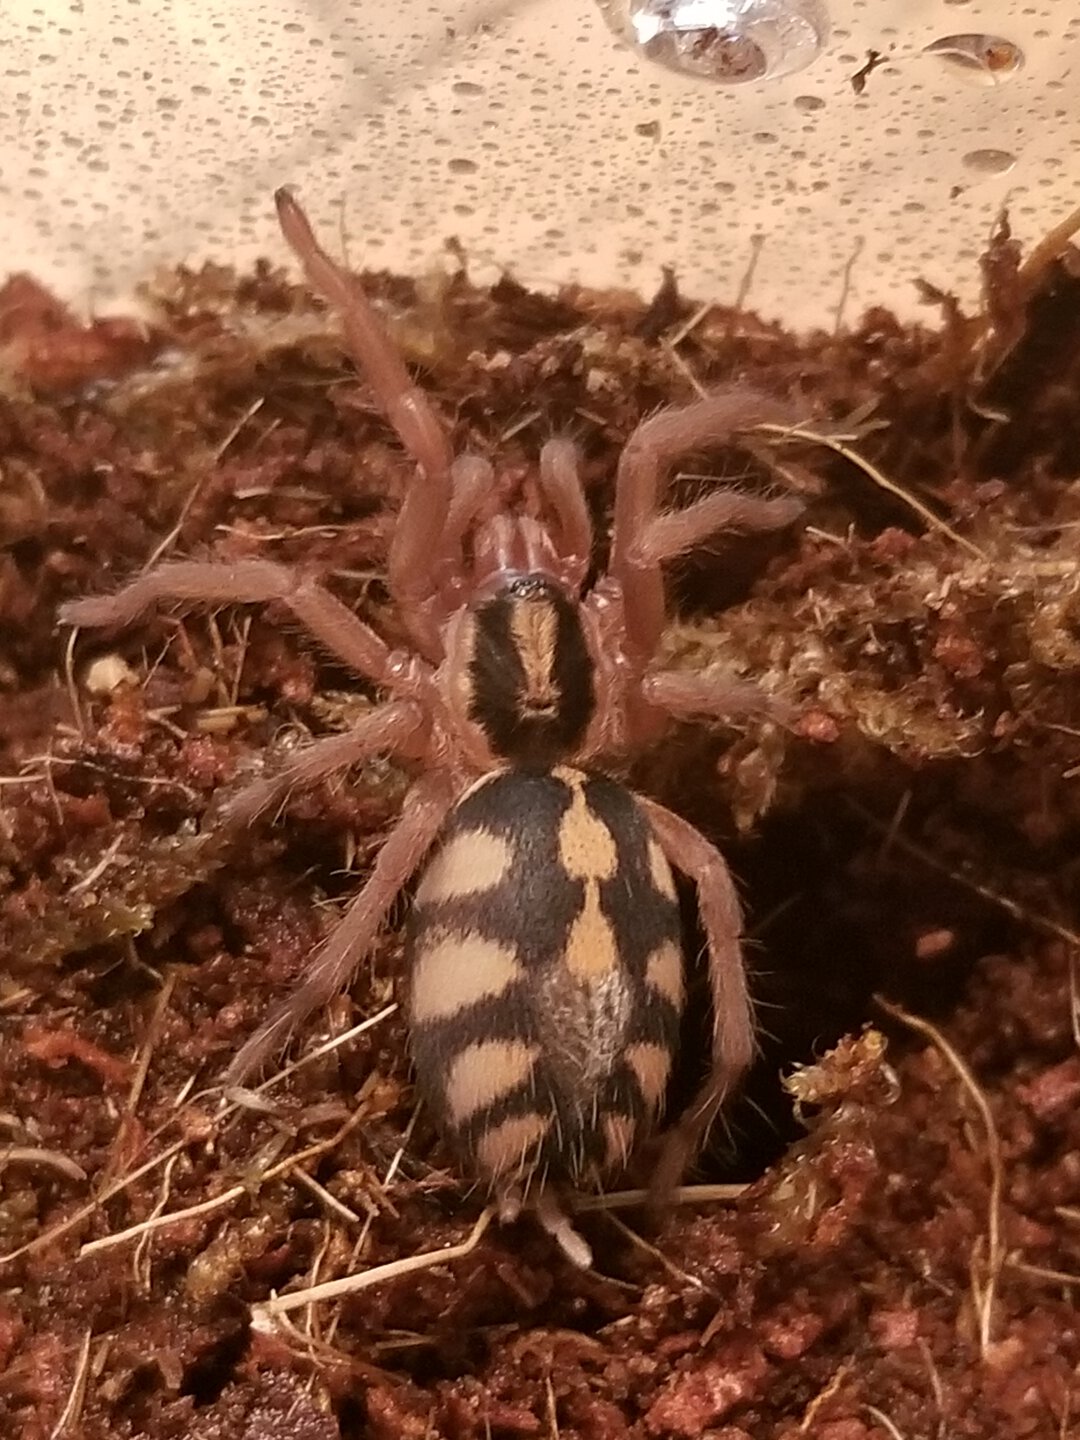 H. sp Colombia lrg. sling one of two